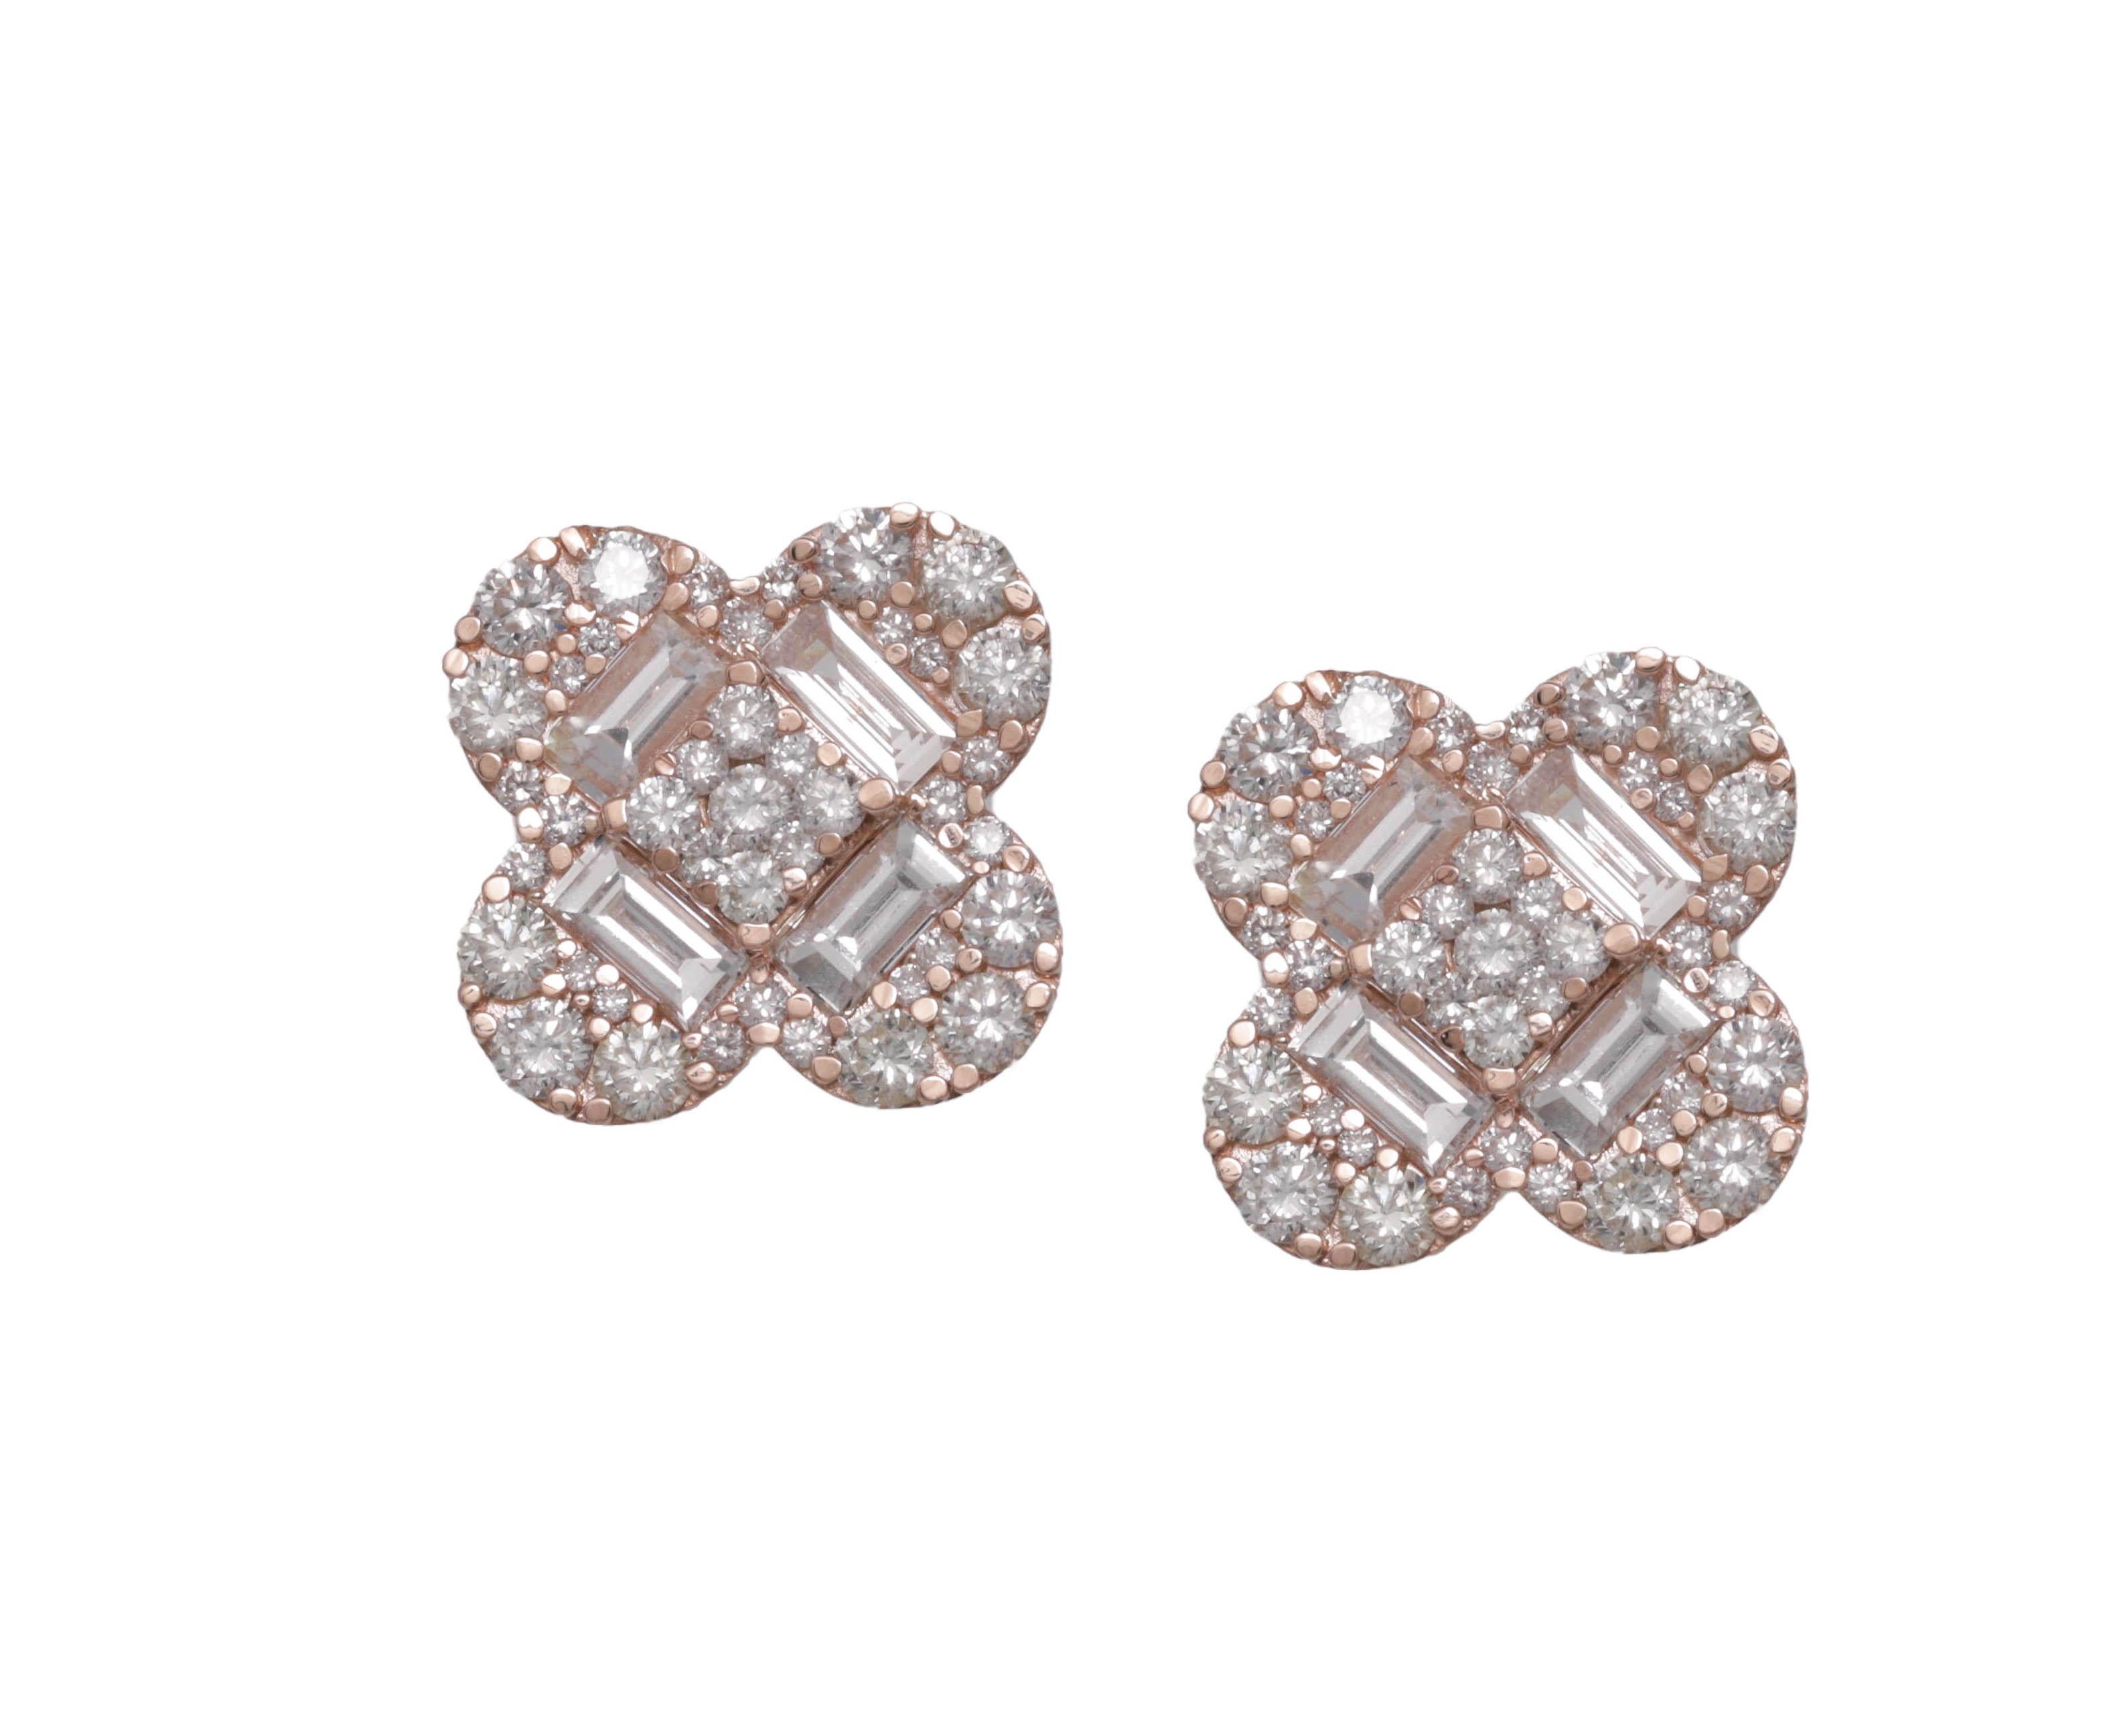 14K Rose Gold Diamond Earrings featuring 1.30 Carats of Diamonds

Underline your look with this sharp 14K Rose gold clover shape Diamond Earrings. High quality Diamonds. This Earrings will underline your exquisite look for any occasion.

. is a